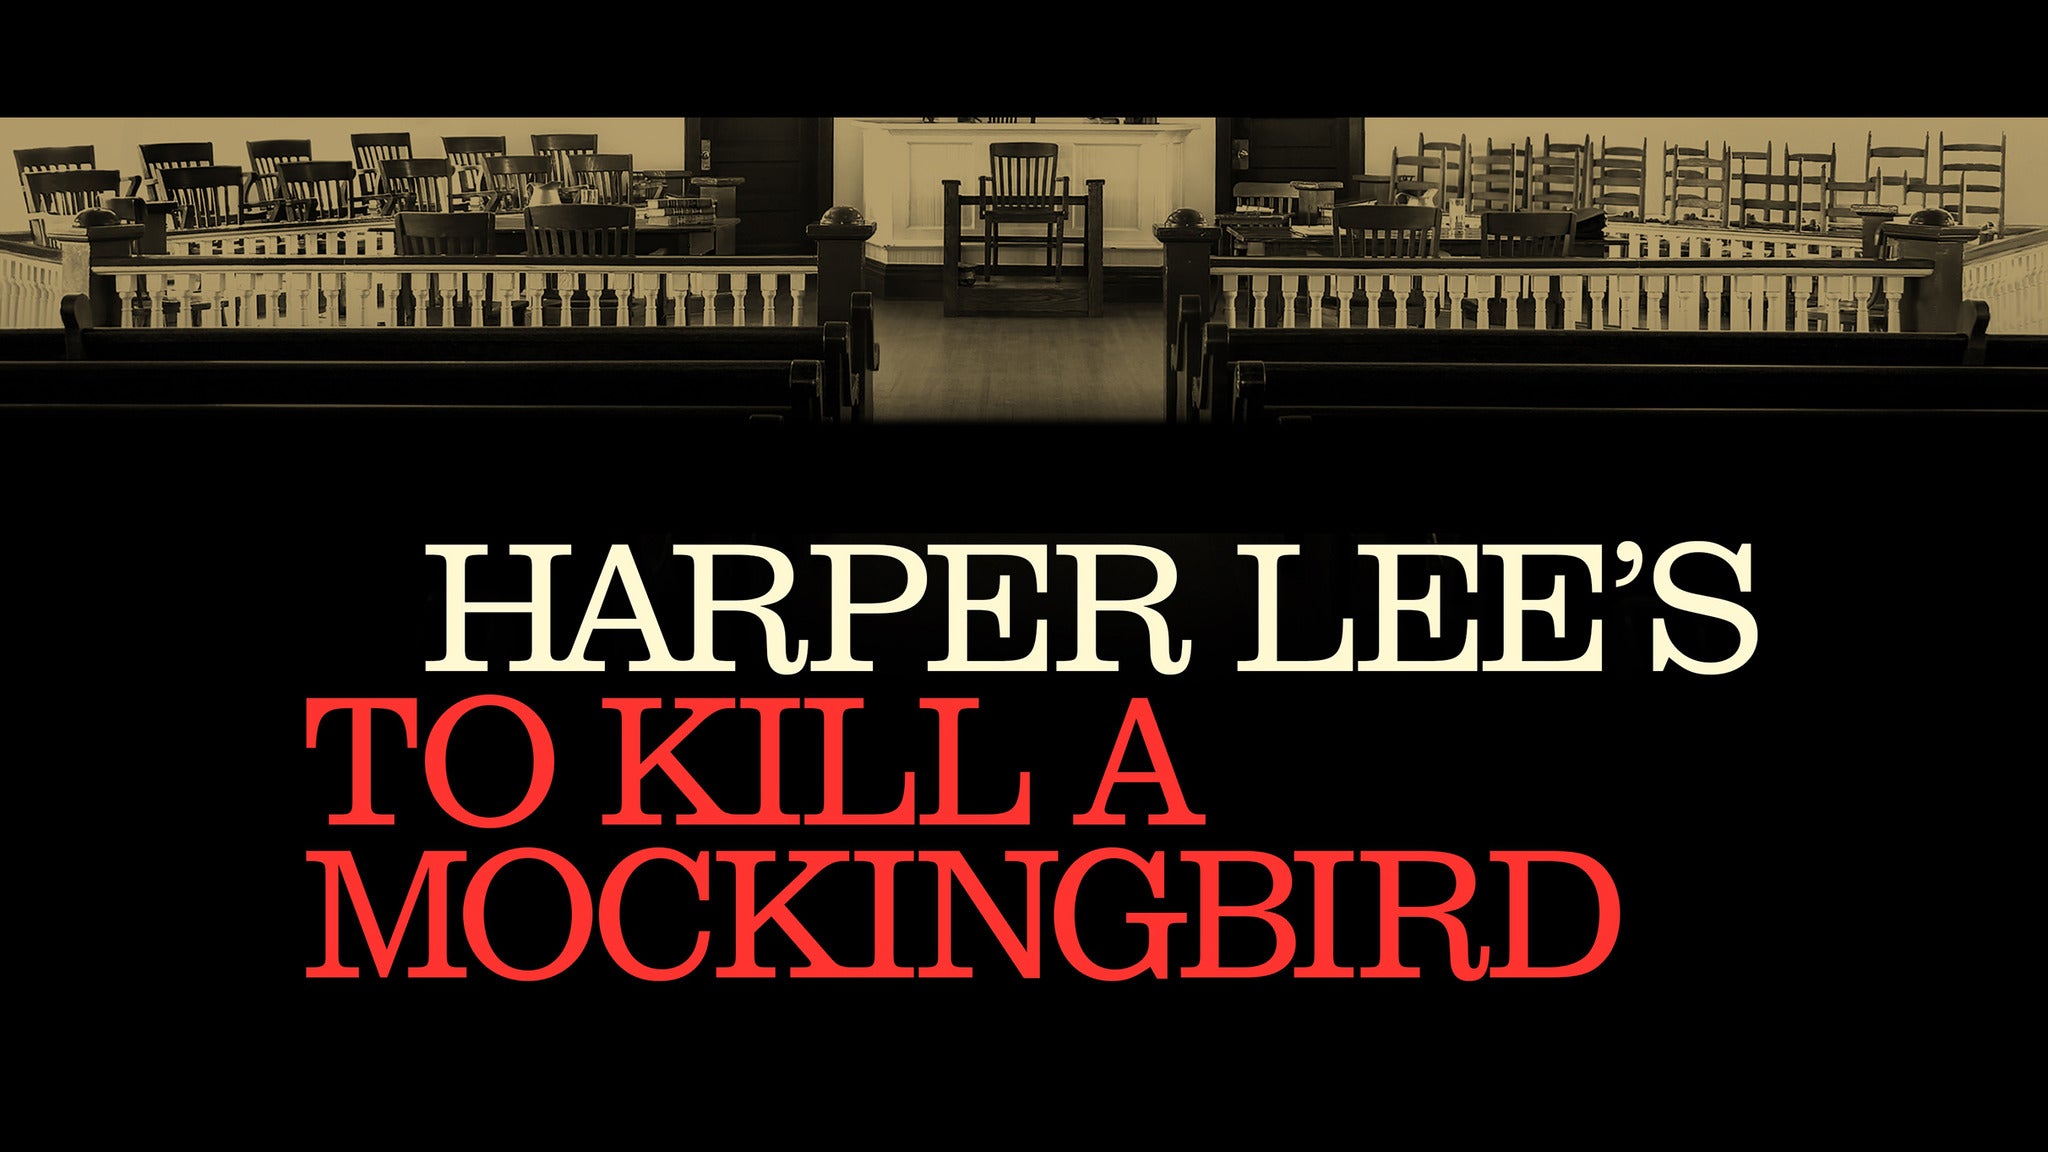 Main image for event titled Broadway in Thousand Oaks presents To Kill A Mockingbird